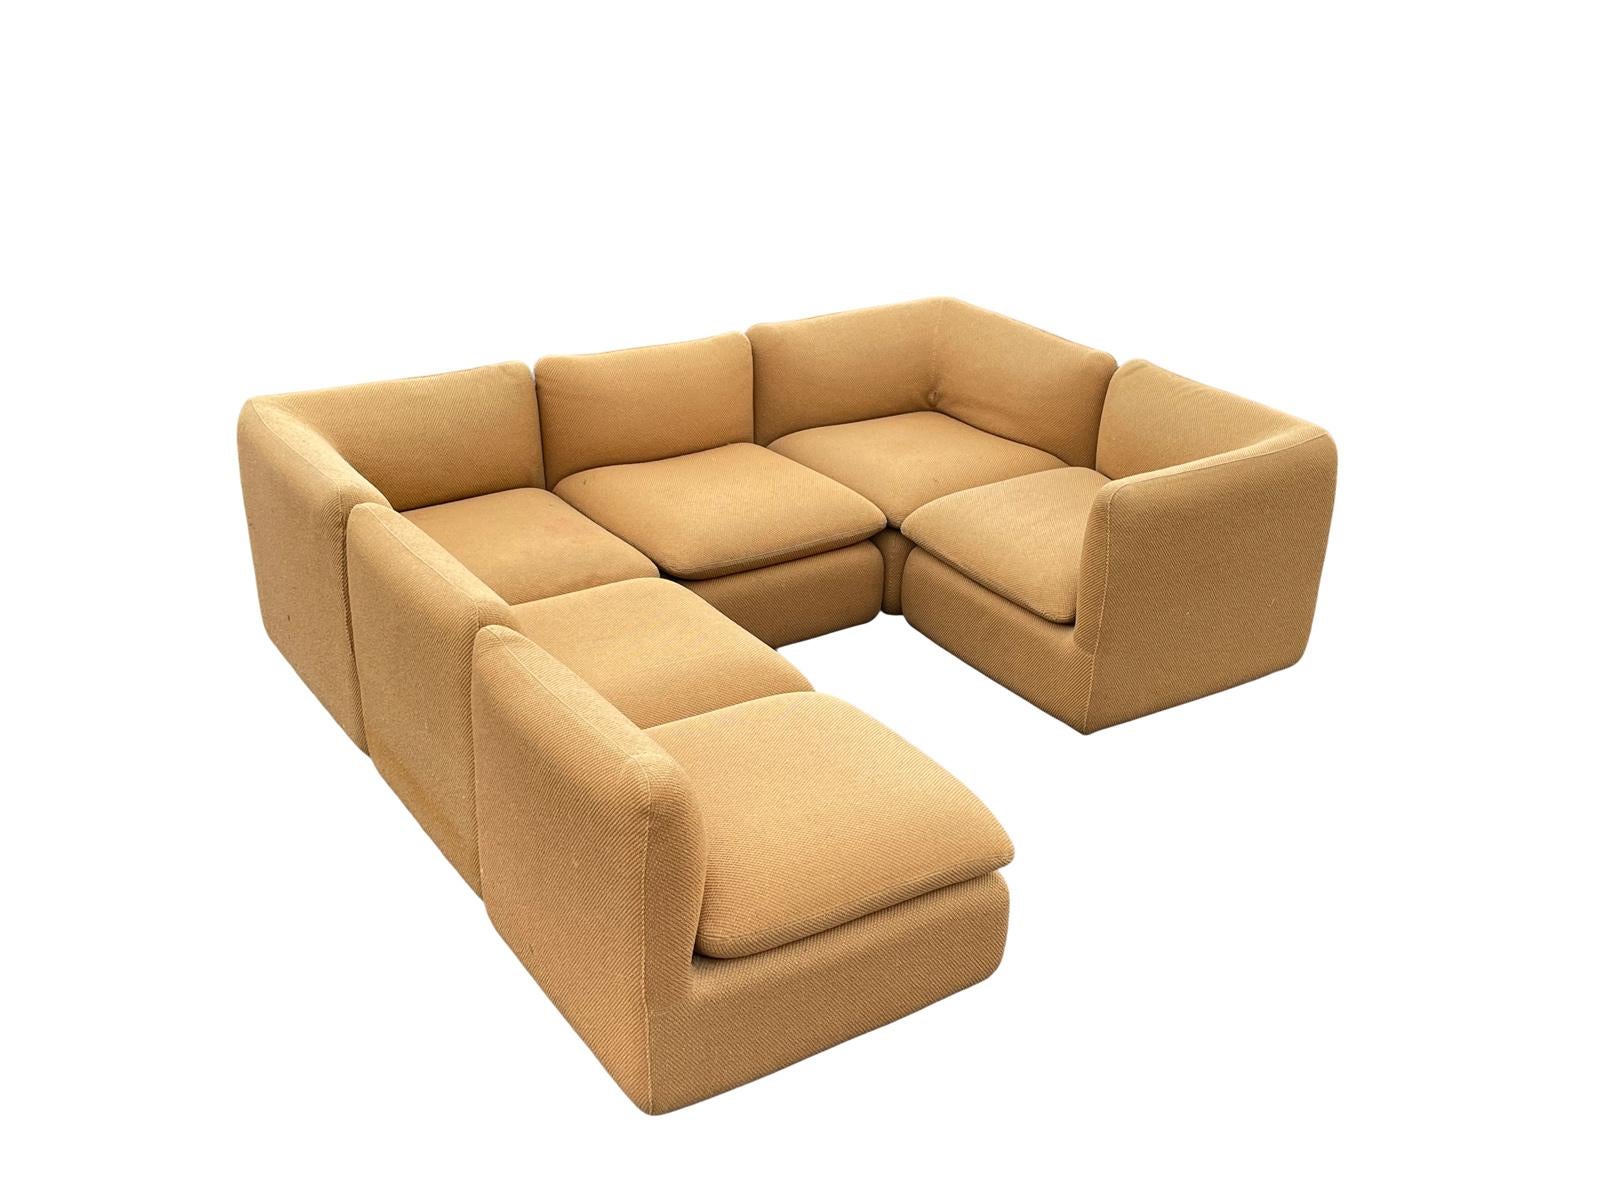 American 1980s Modular Ganging ELYSÉE Sofa Unit Sectional by Steelcase  For Sale